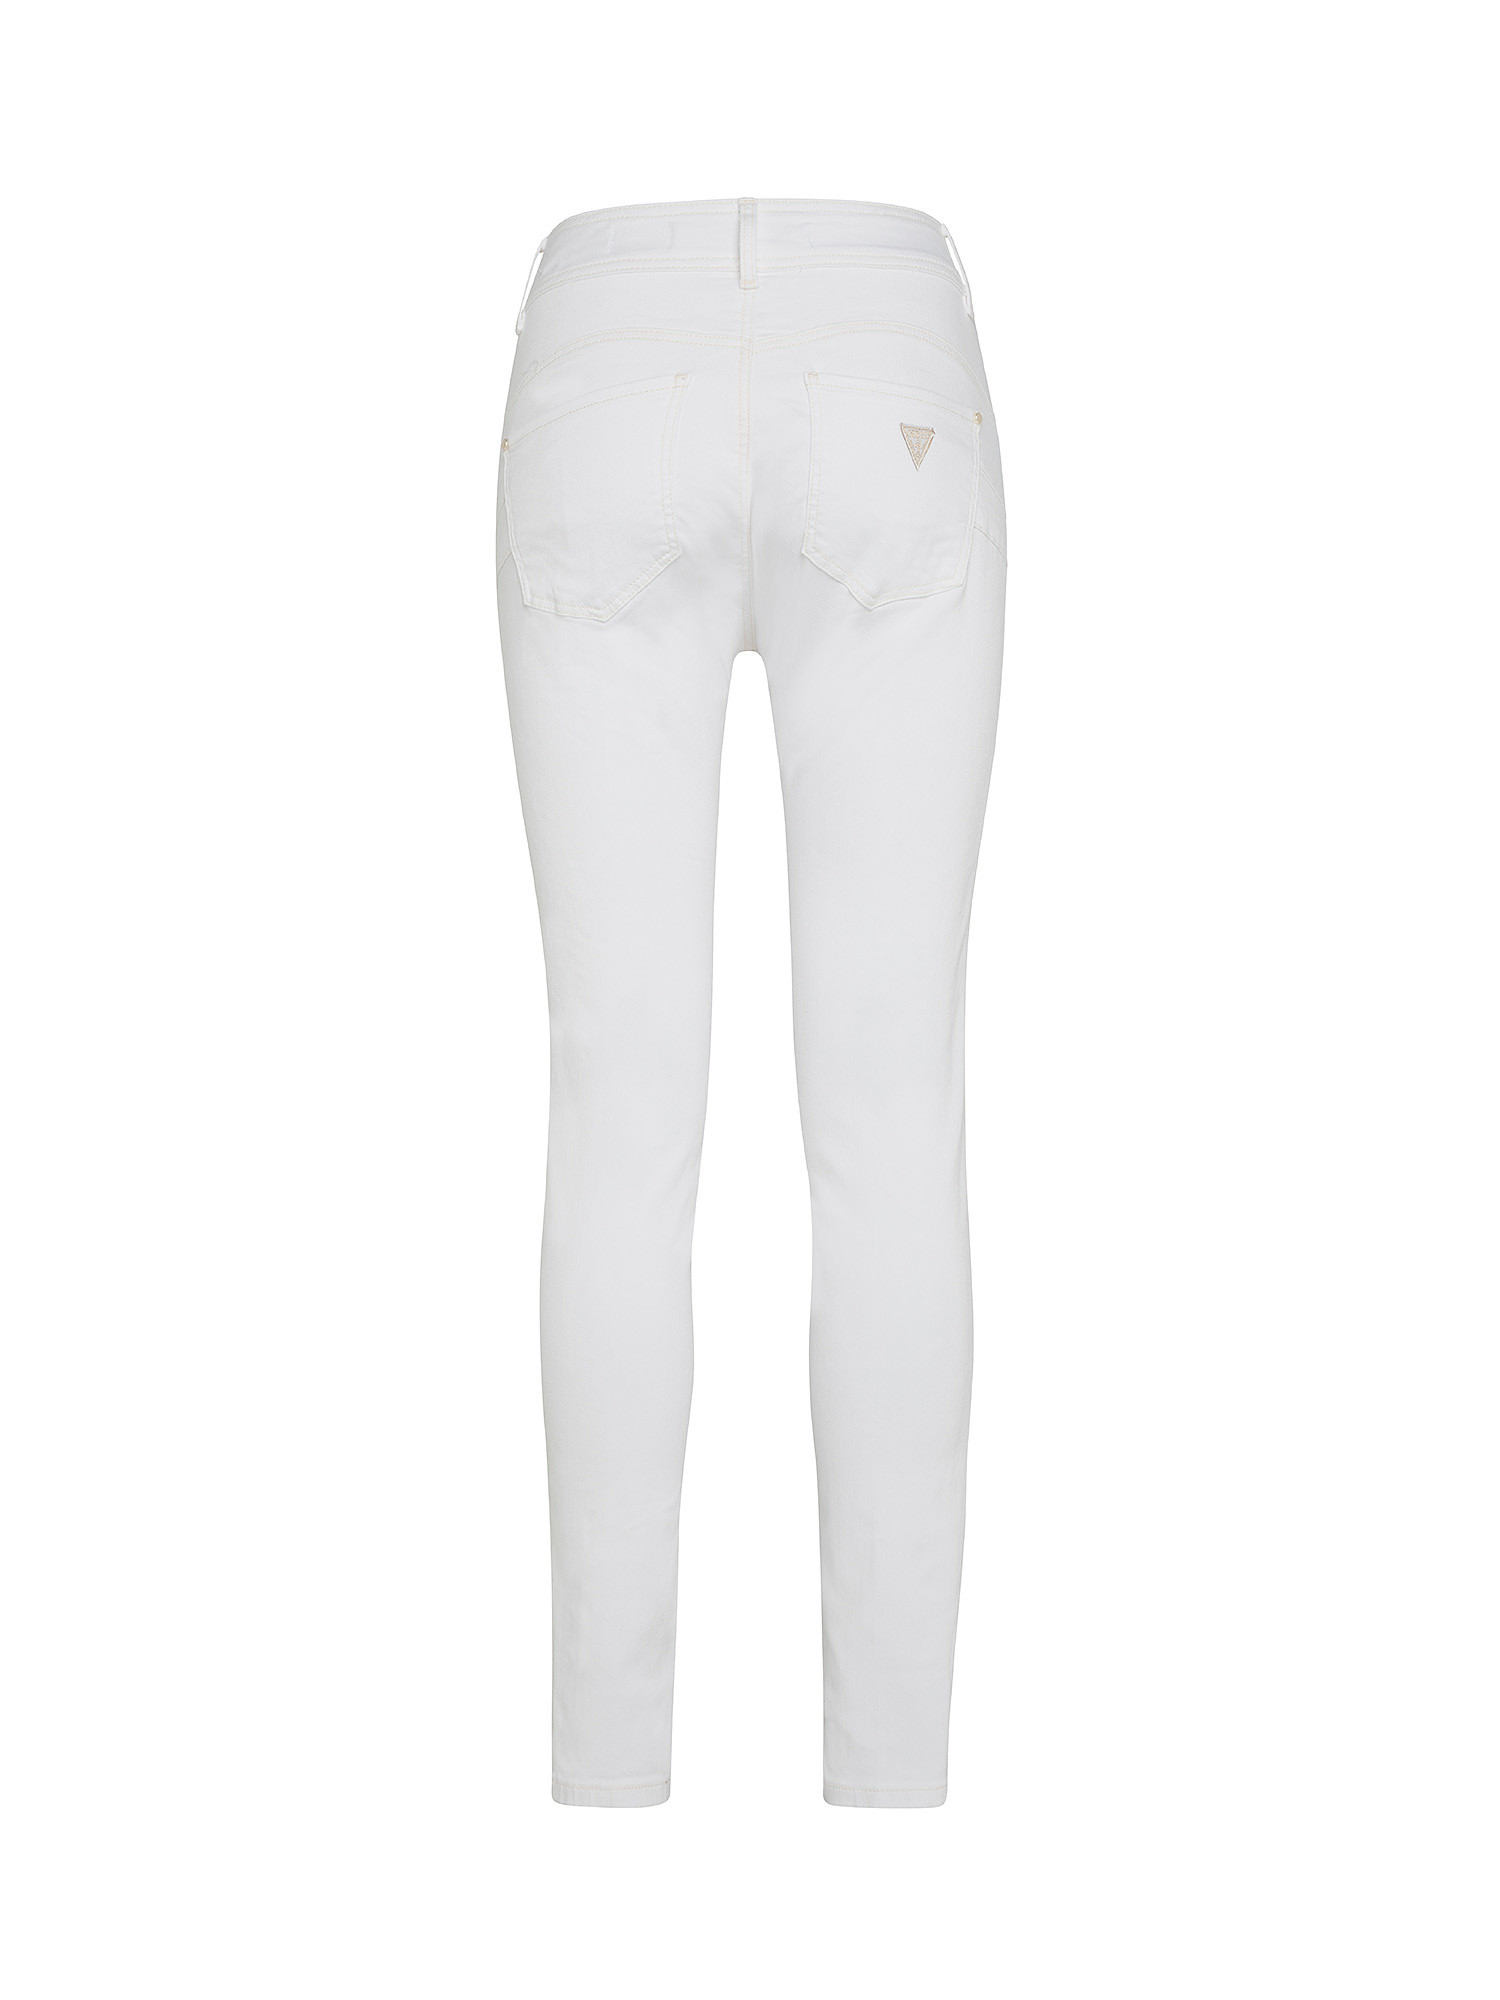 GUESS - Jeans skinny a vita alta, Bianco, large image number 1